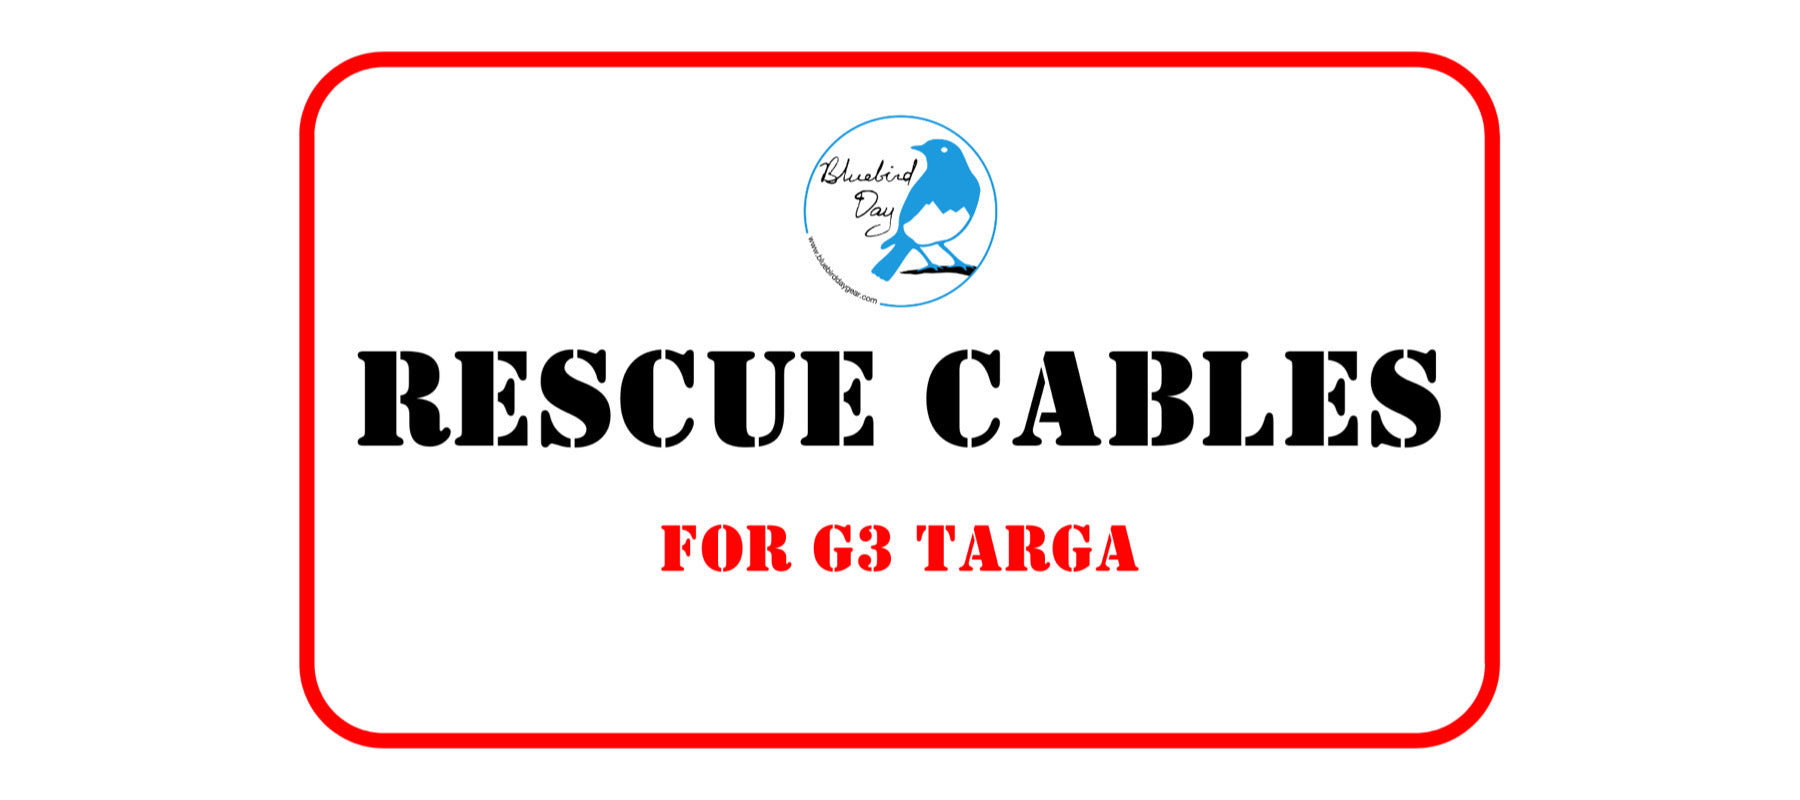 Rescue Cables for G3 Targa Telemark Bindings by Bluebird Day Gear